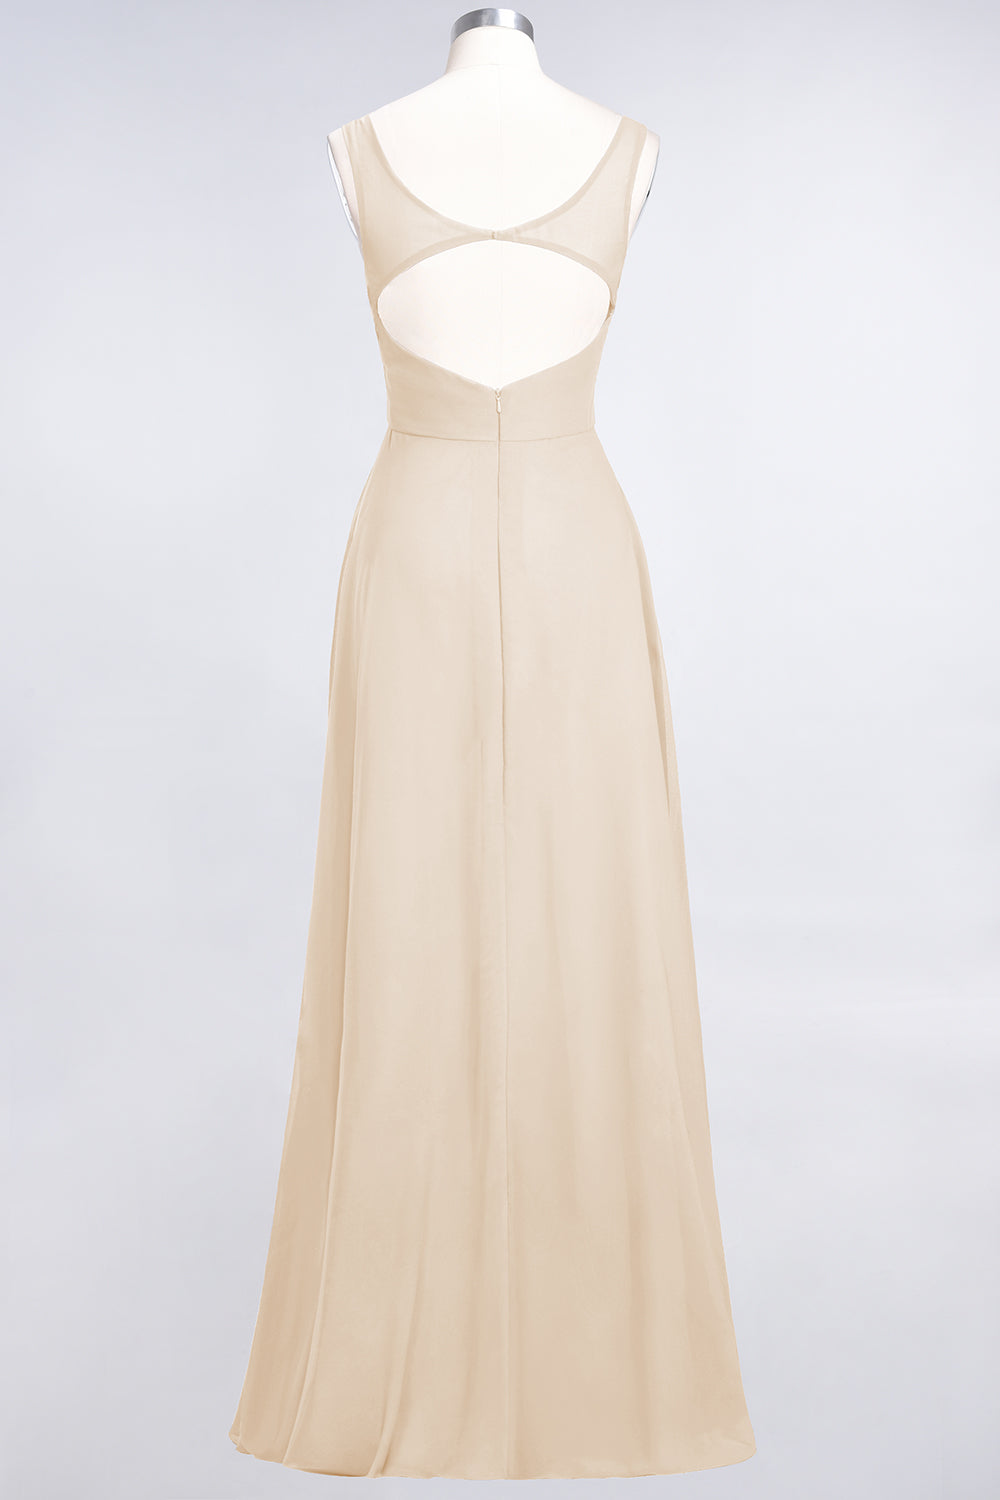 Chic Chiffon V-Neck Straps Ruffle Affordable Bridesmaid Dresses with Open Back-27dress